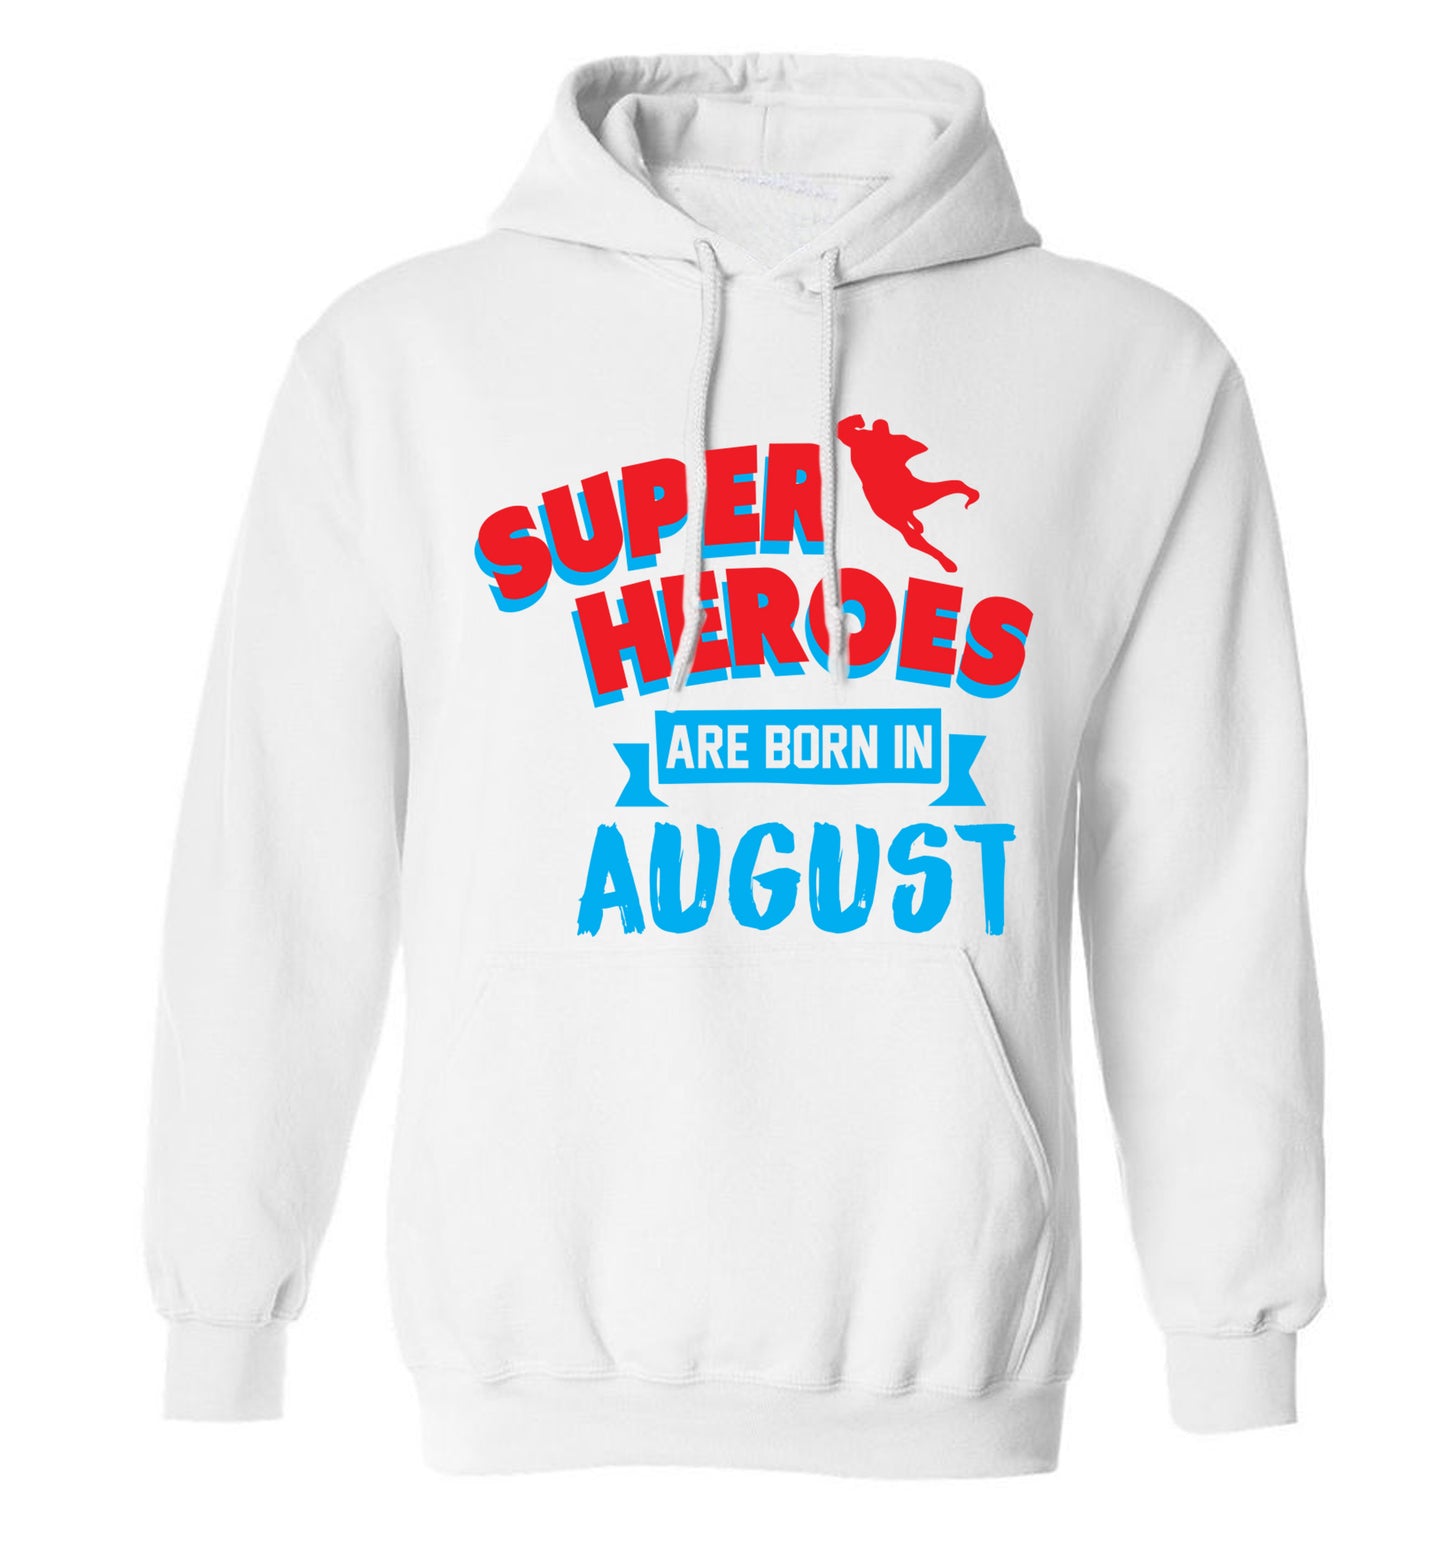 Superheroes are born in August adults unisex white hoodie 2XL